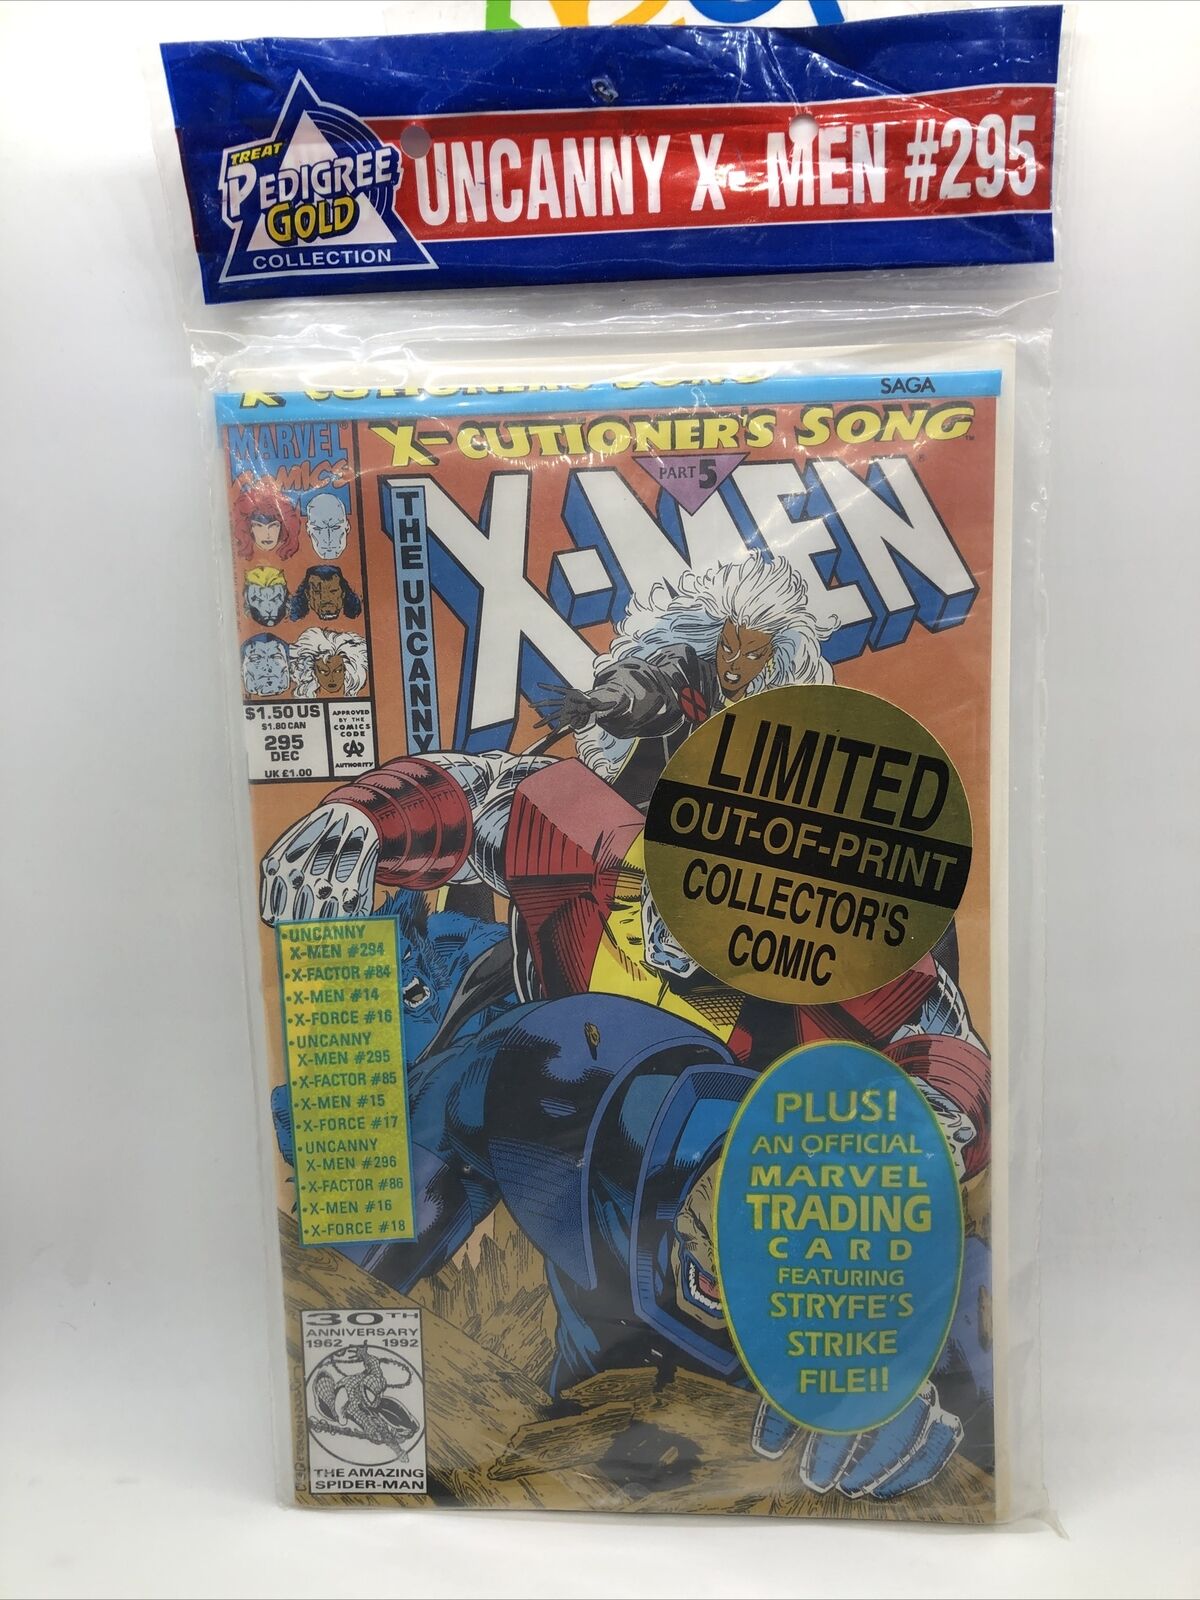 The Uncanny X-Men #295 bagged with trading card (Dec 1992, Marvel)